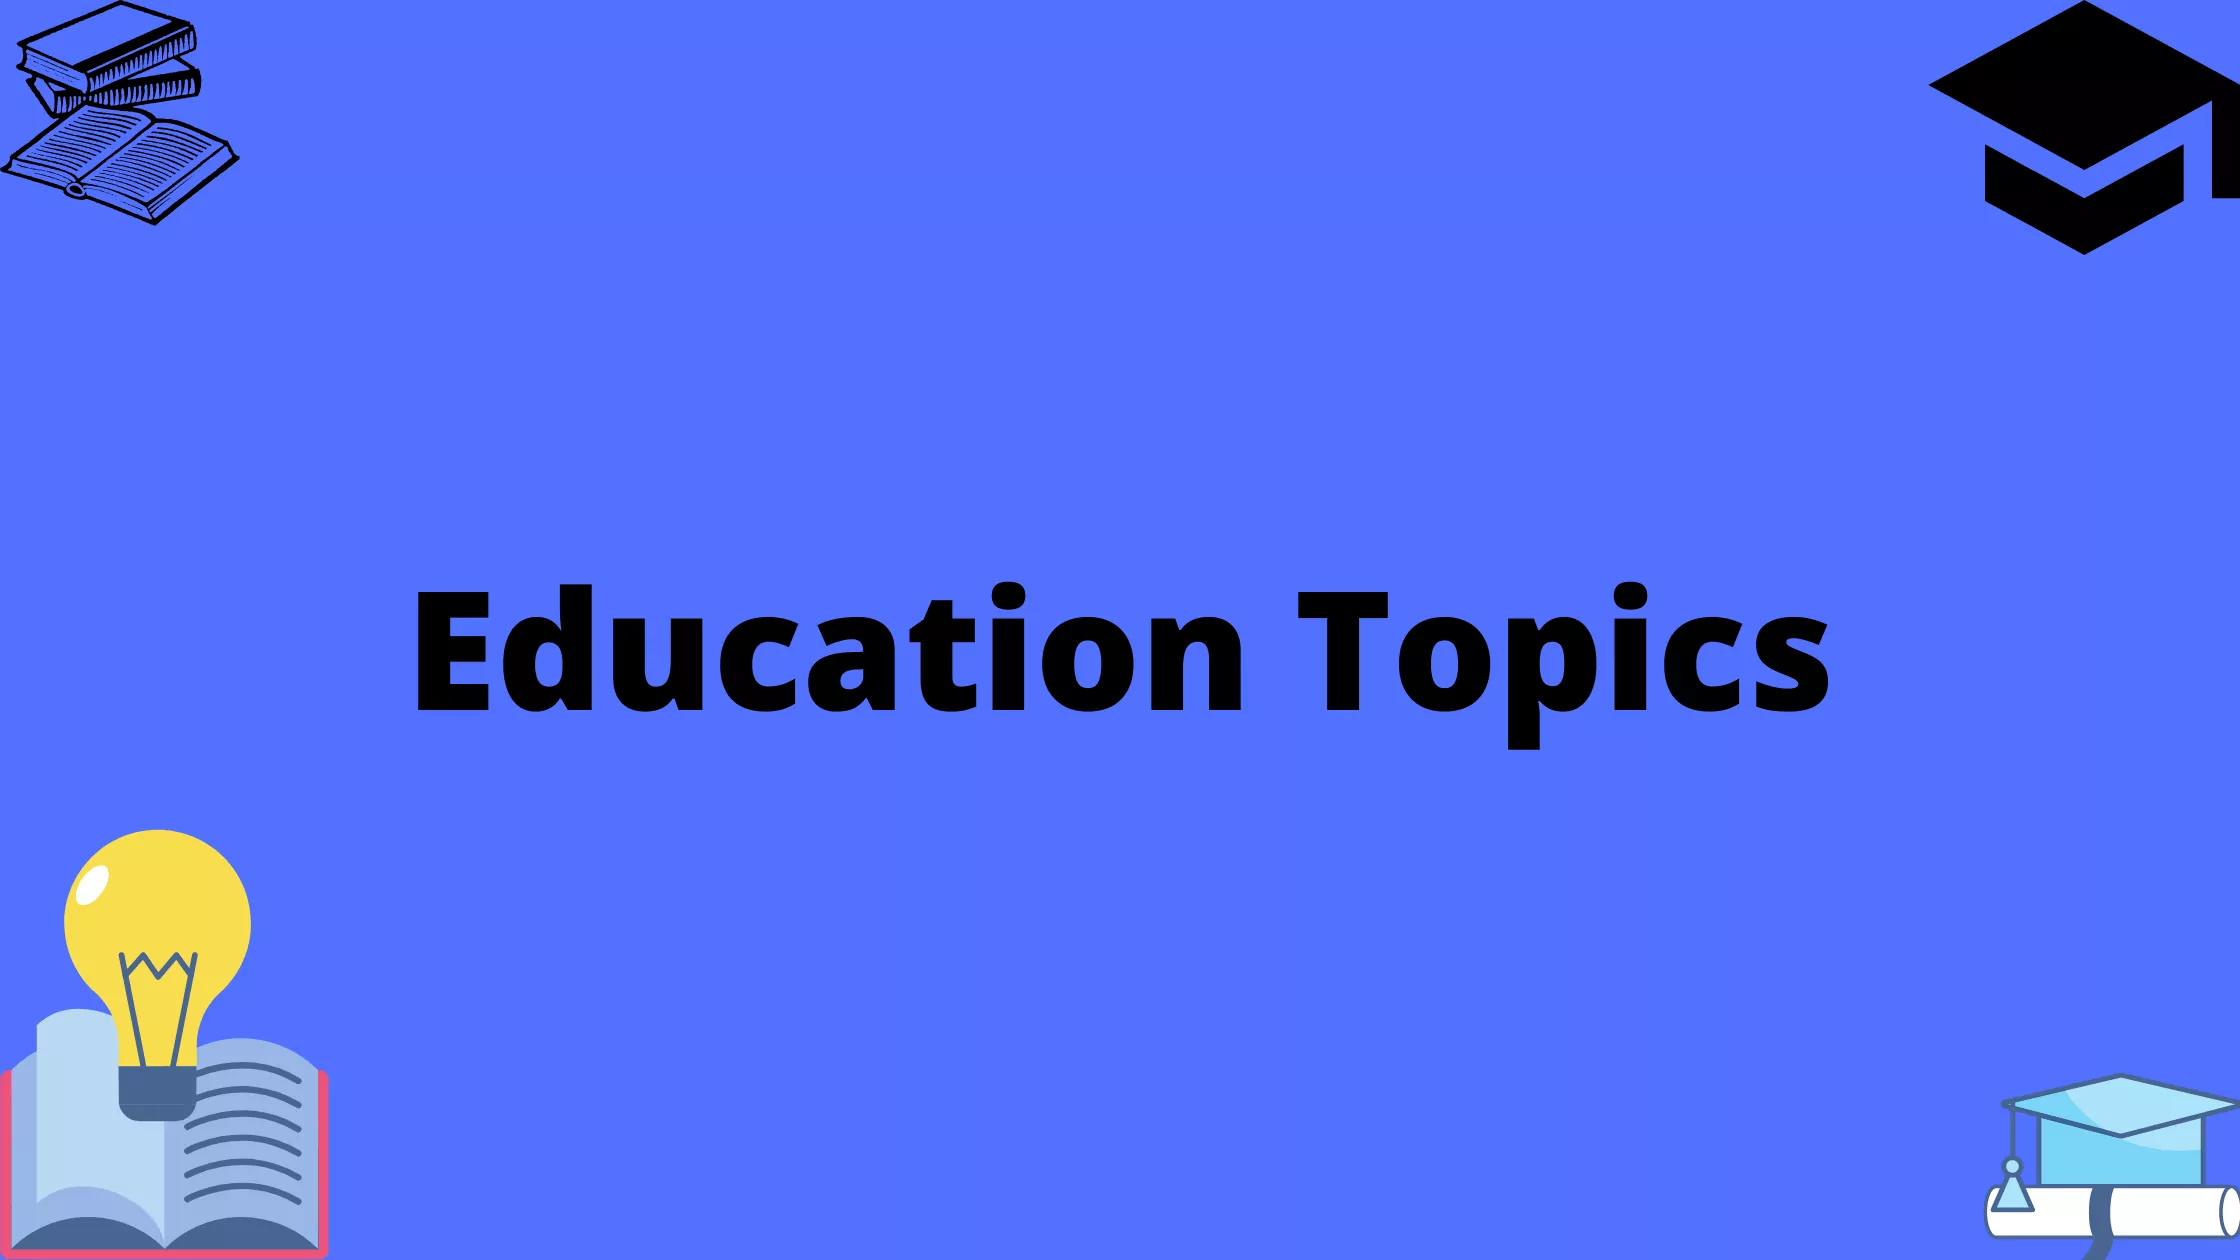 thesis topic ideas for education